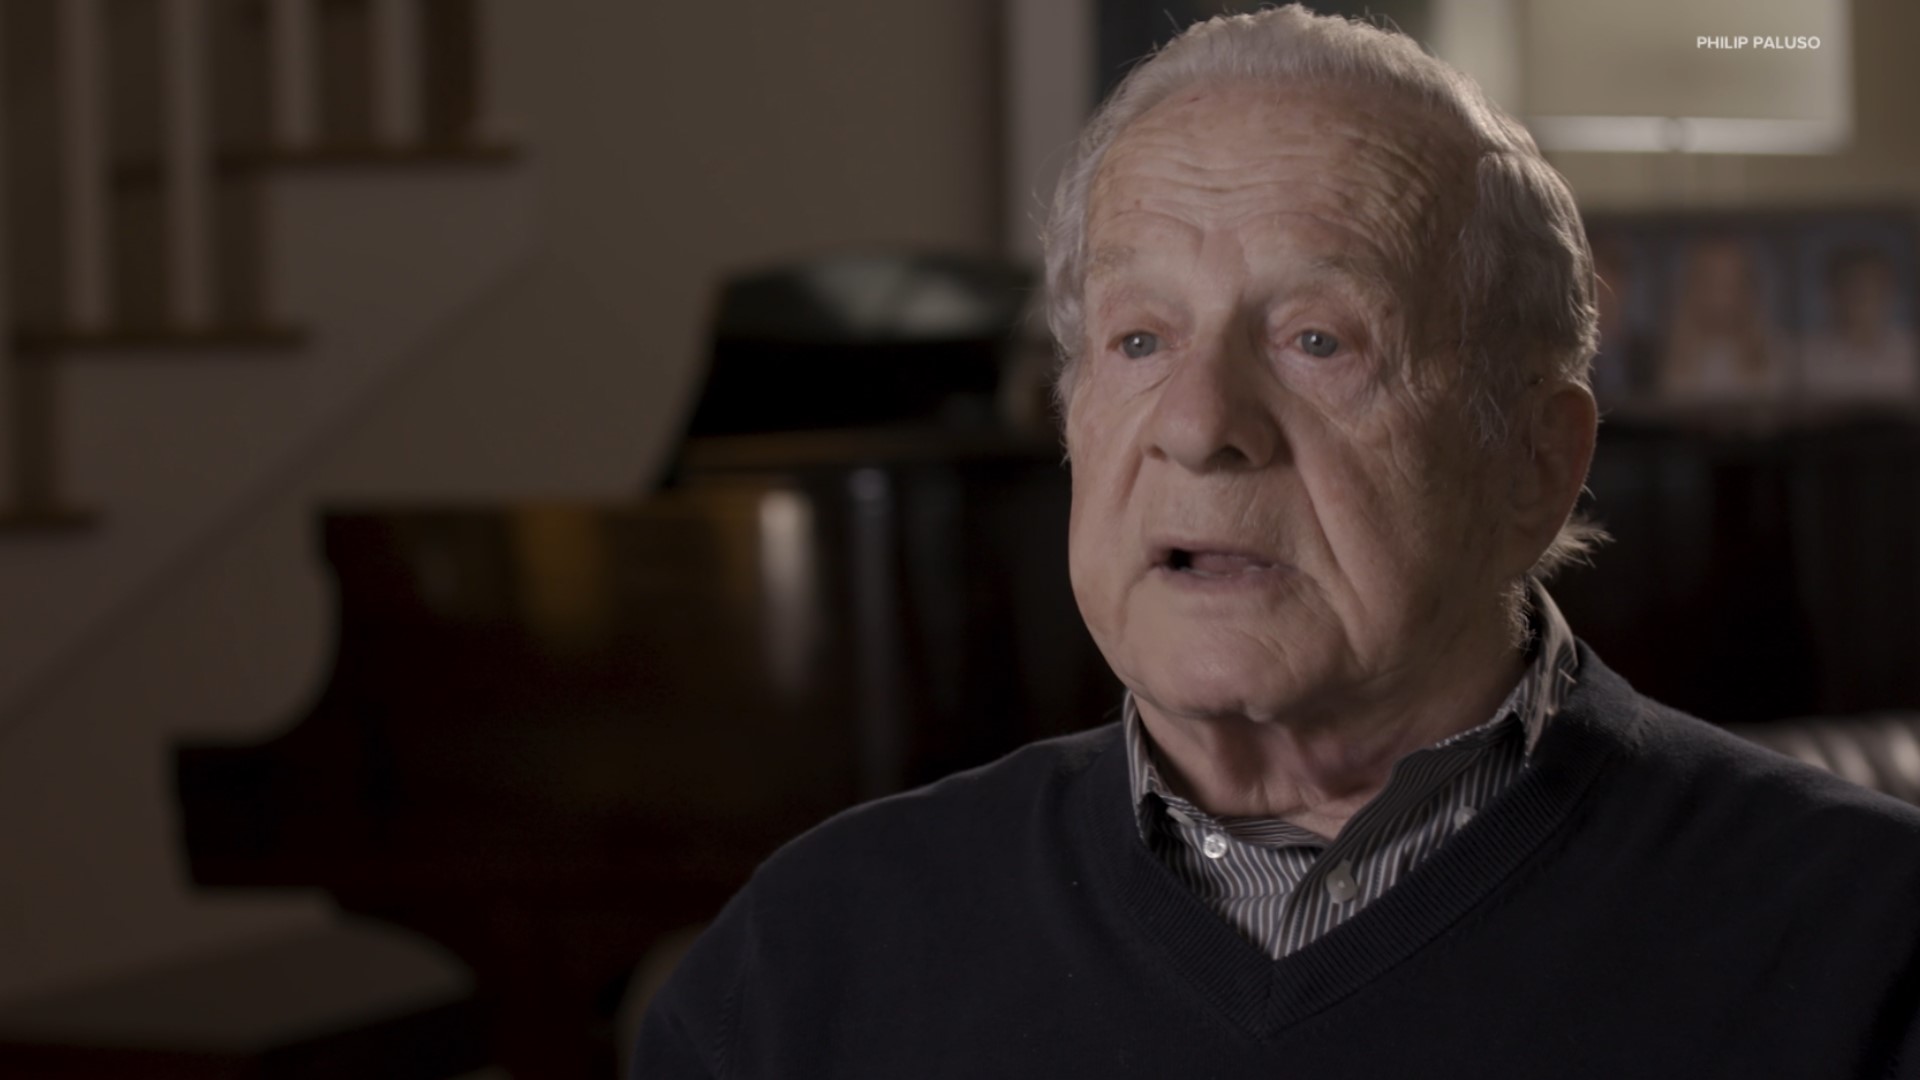 Frank Grunwald spent his adult life in Indianapolis, but as a child, suffered the devastating consequences of hatred at the hands of the Nazis.